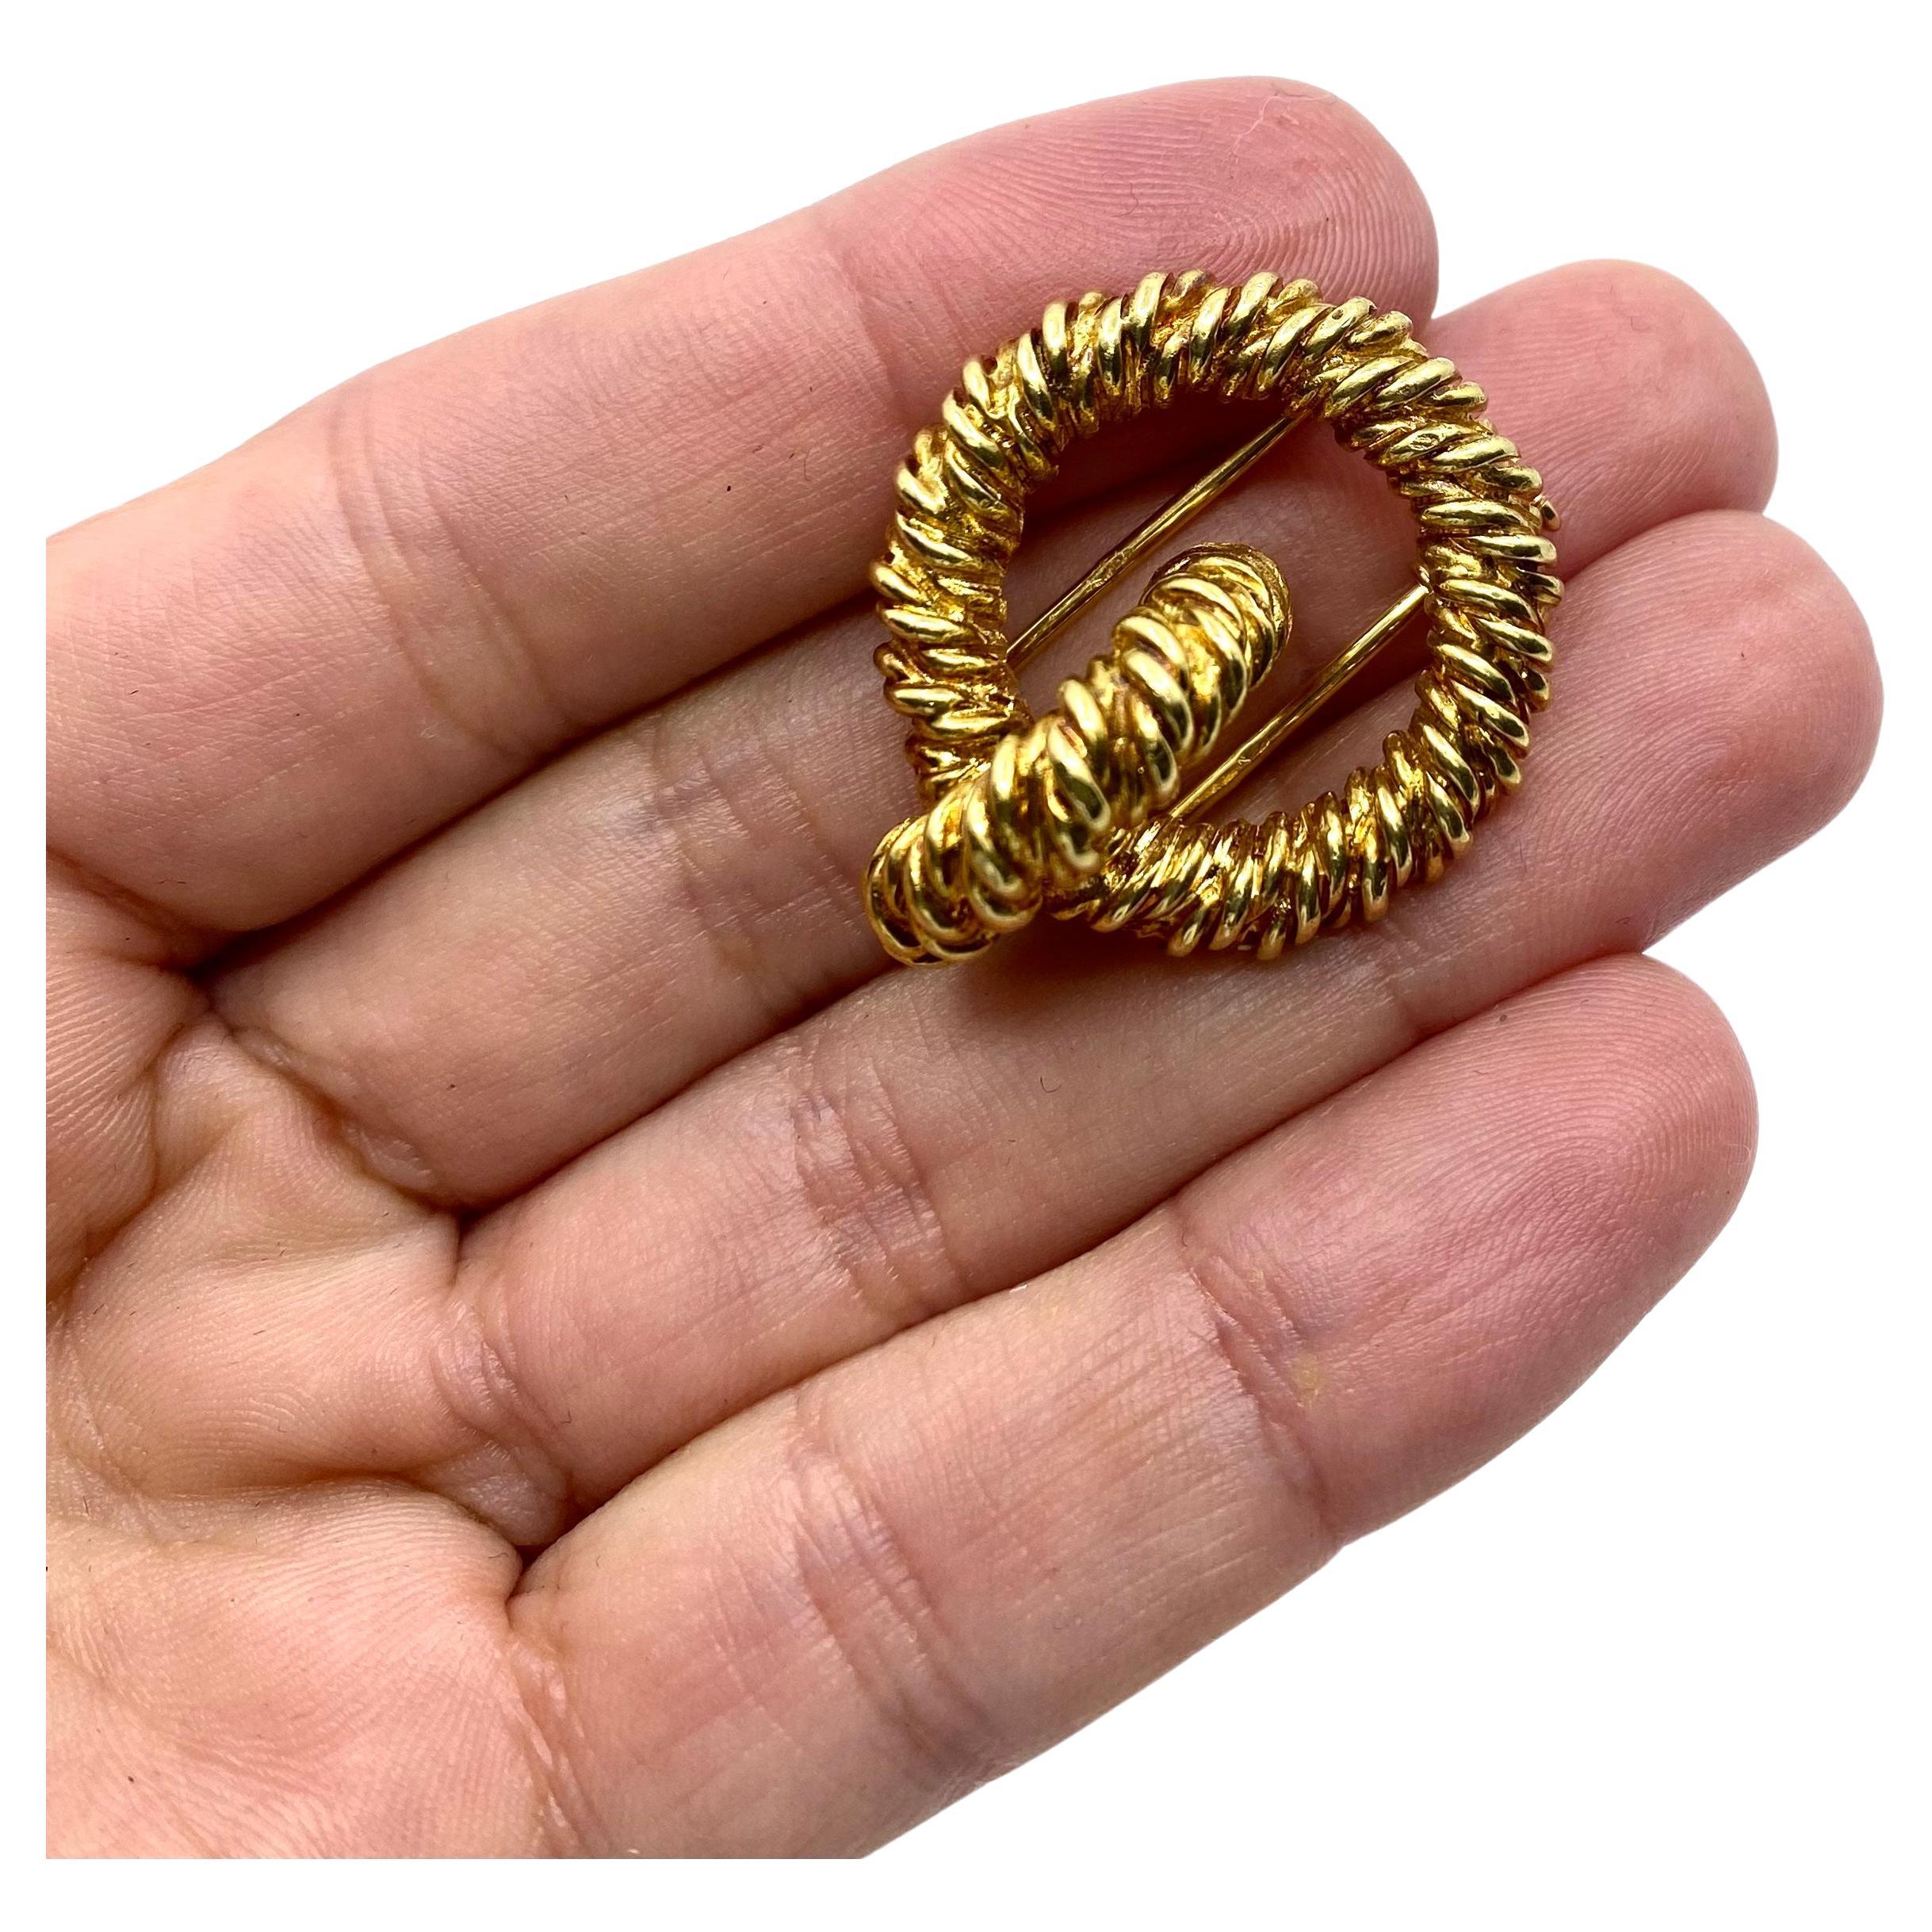 An elegant Hermès knot brooch made of 18k gold.  This vintage brooch is a discerning piece crafted by an expert of the knot-shaped jewelry. An emblematic knot motif is a recurring symbol in various Hermes items, including Hermes scarves, handbags,